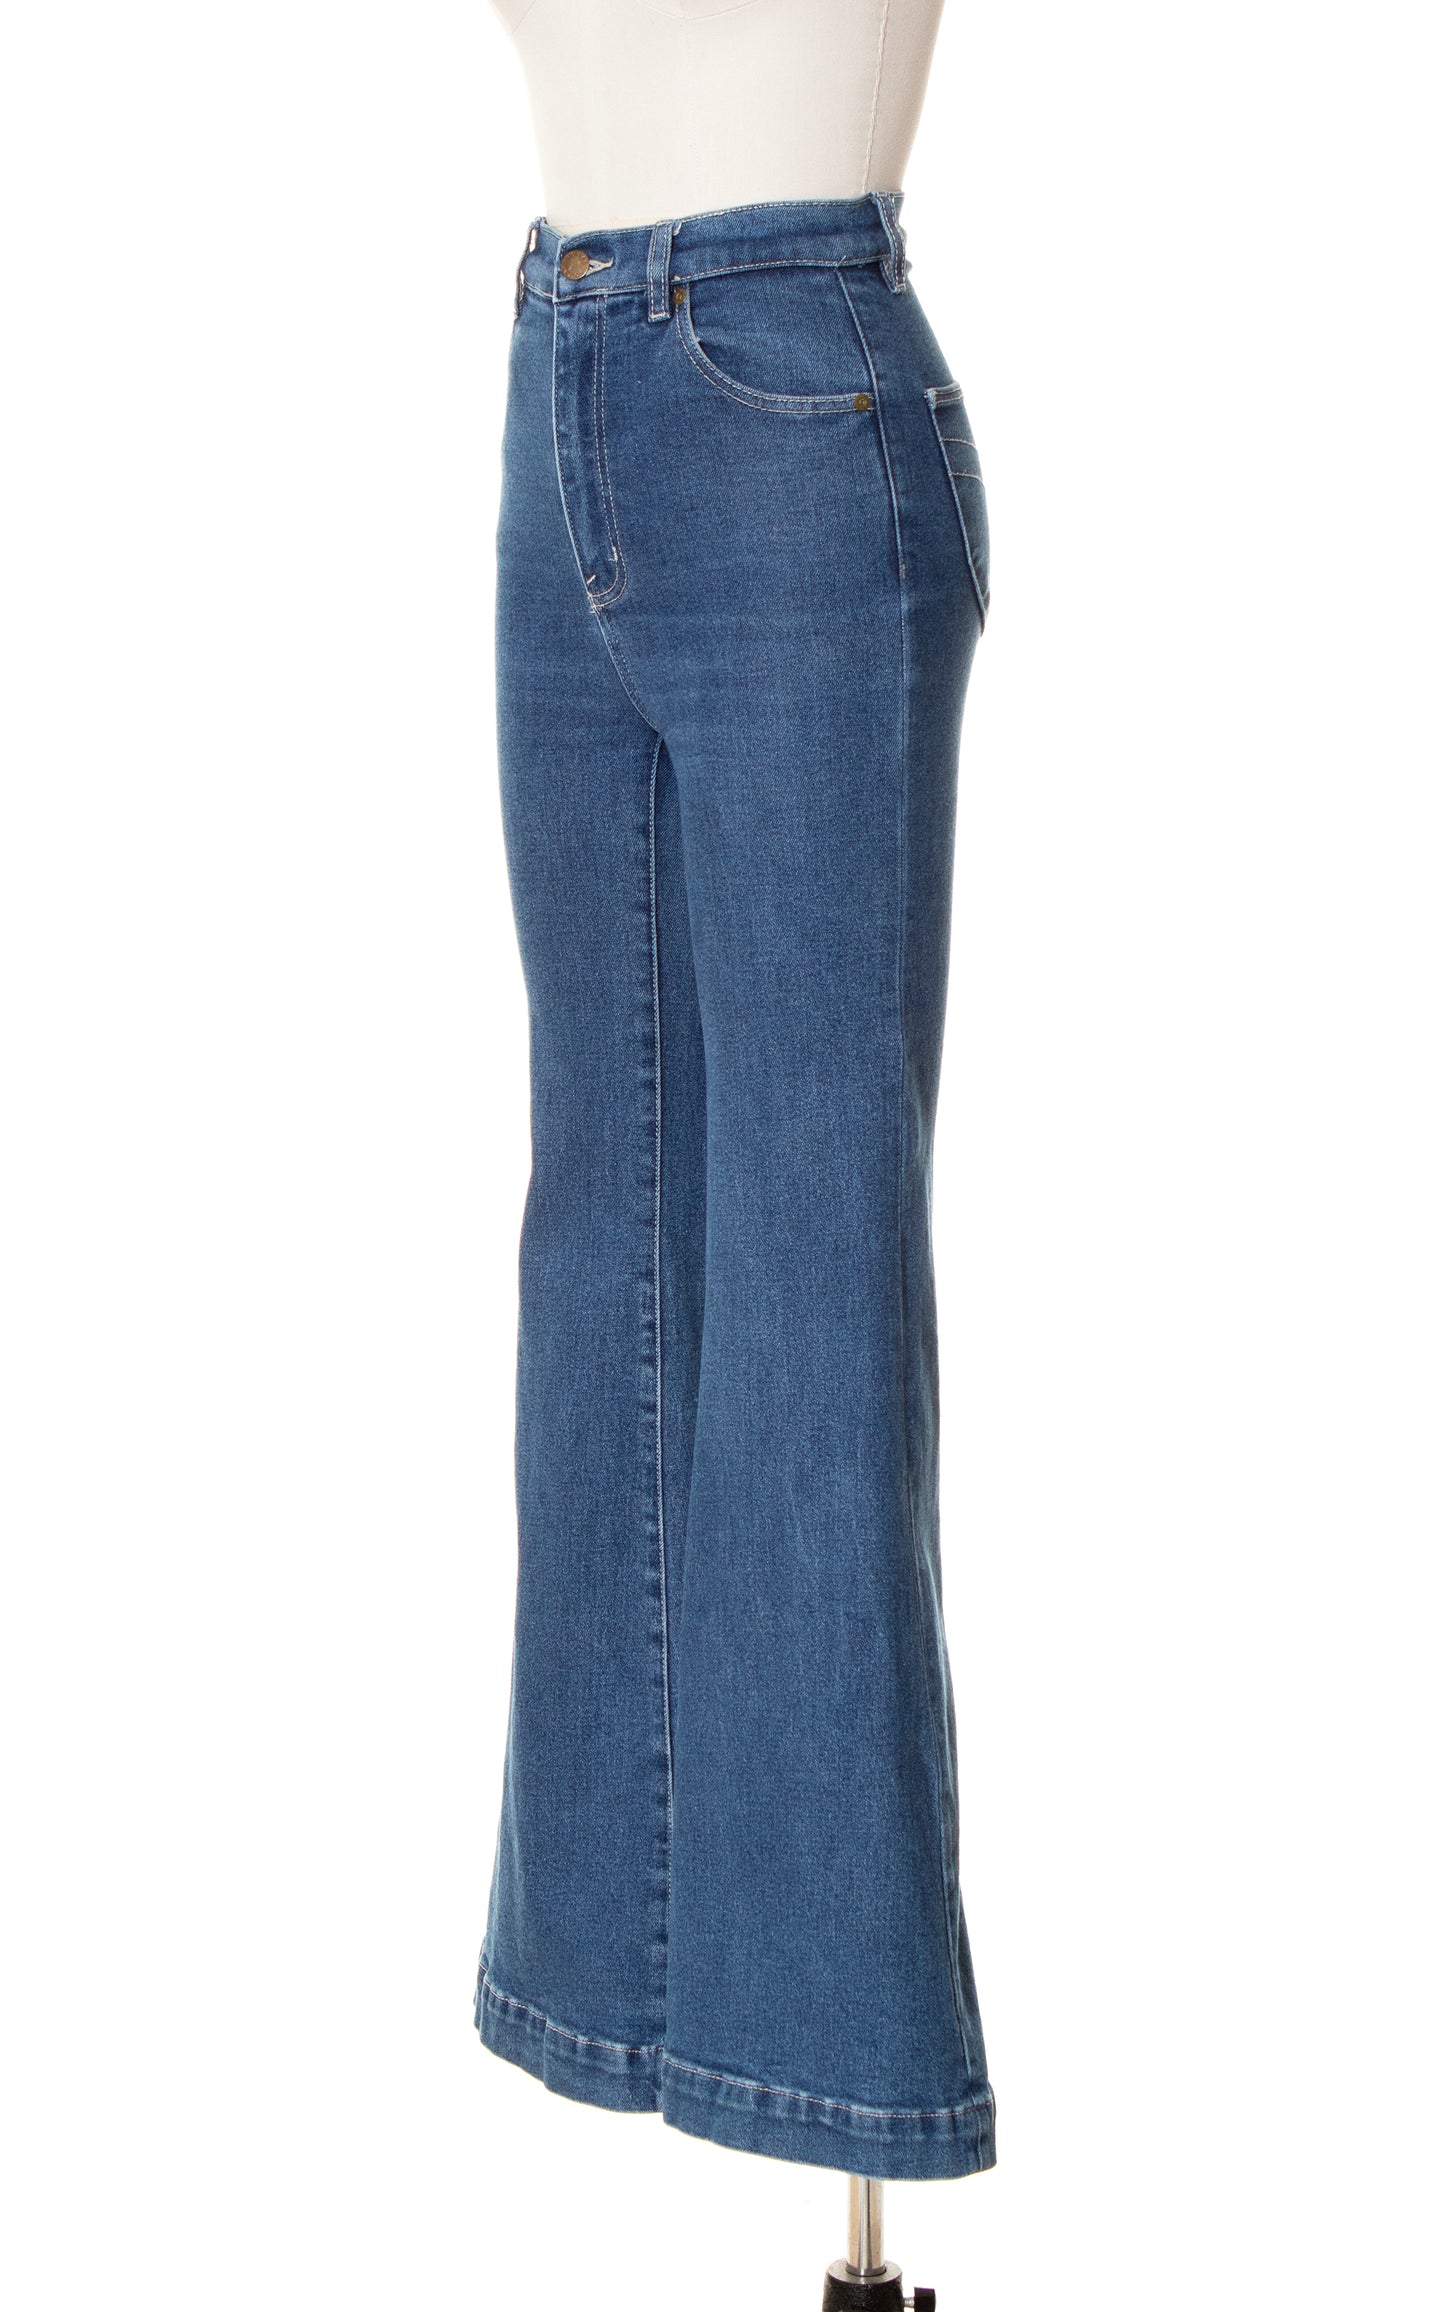 MODERN Rolla's "Eastcoast Flare" Stretchy Bell Bottom Jeans | x-small/small